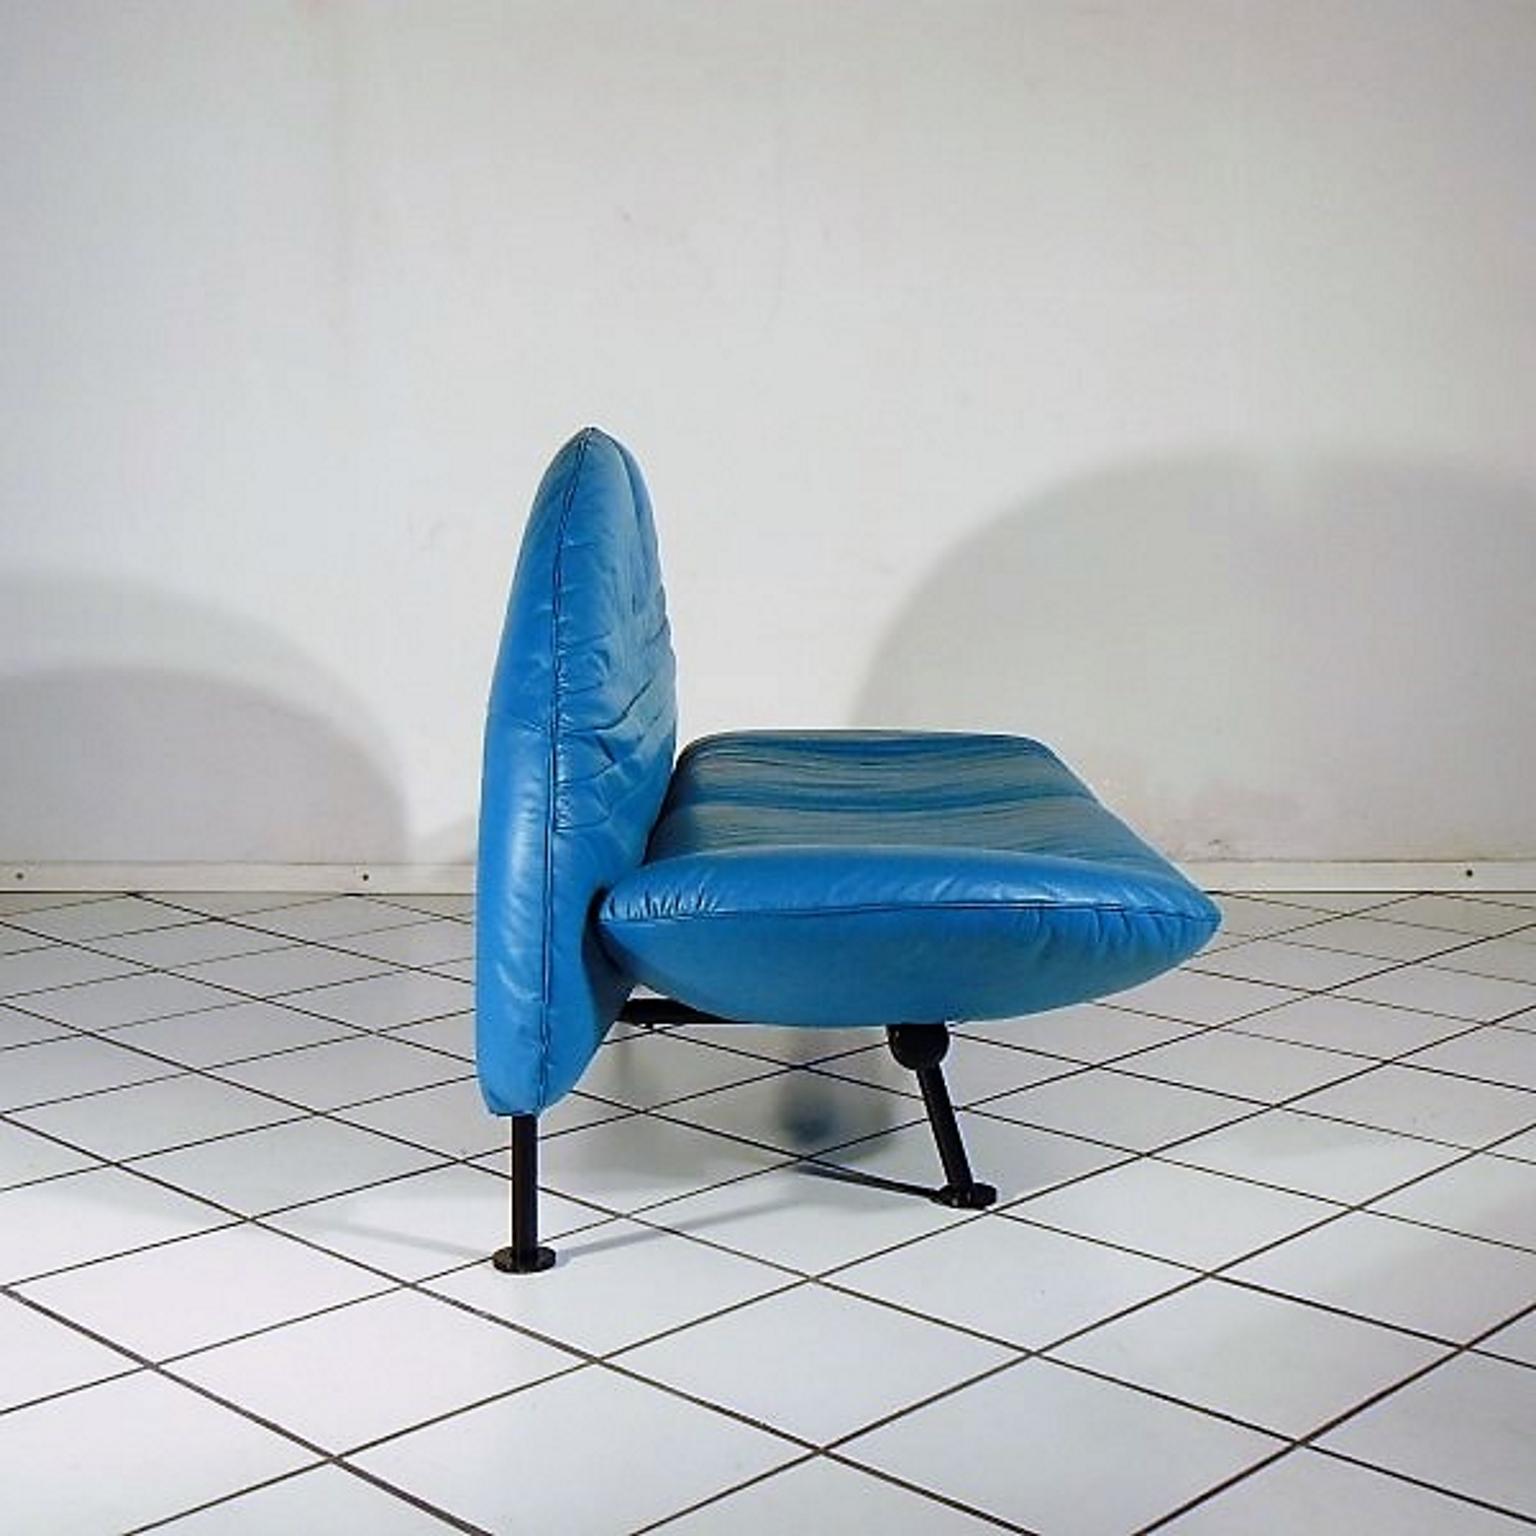 1980s Adjustable Loveseat Turquoise Leather by Walter Leeman for Sormani, Italy For Sale 4